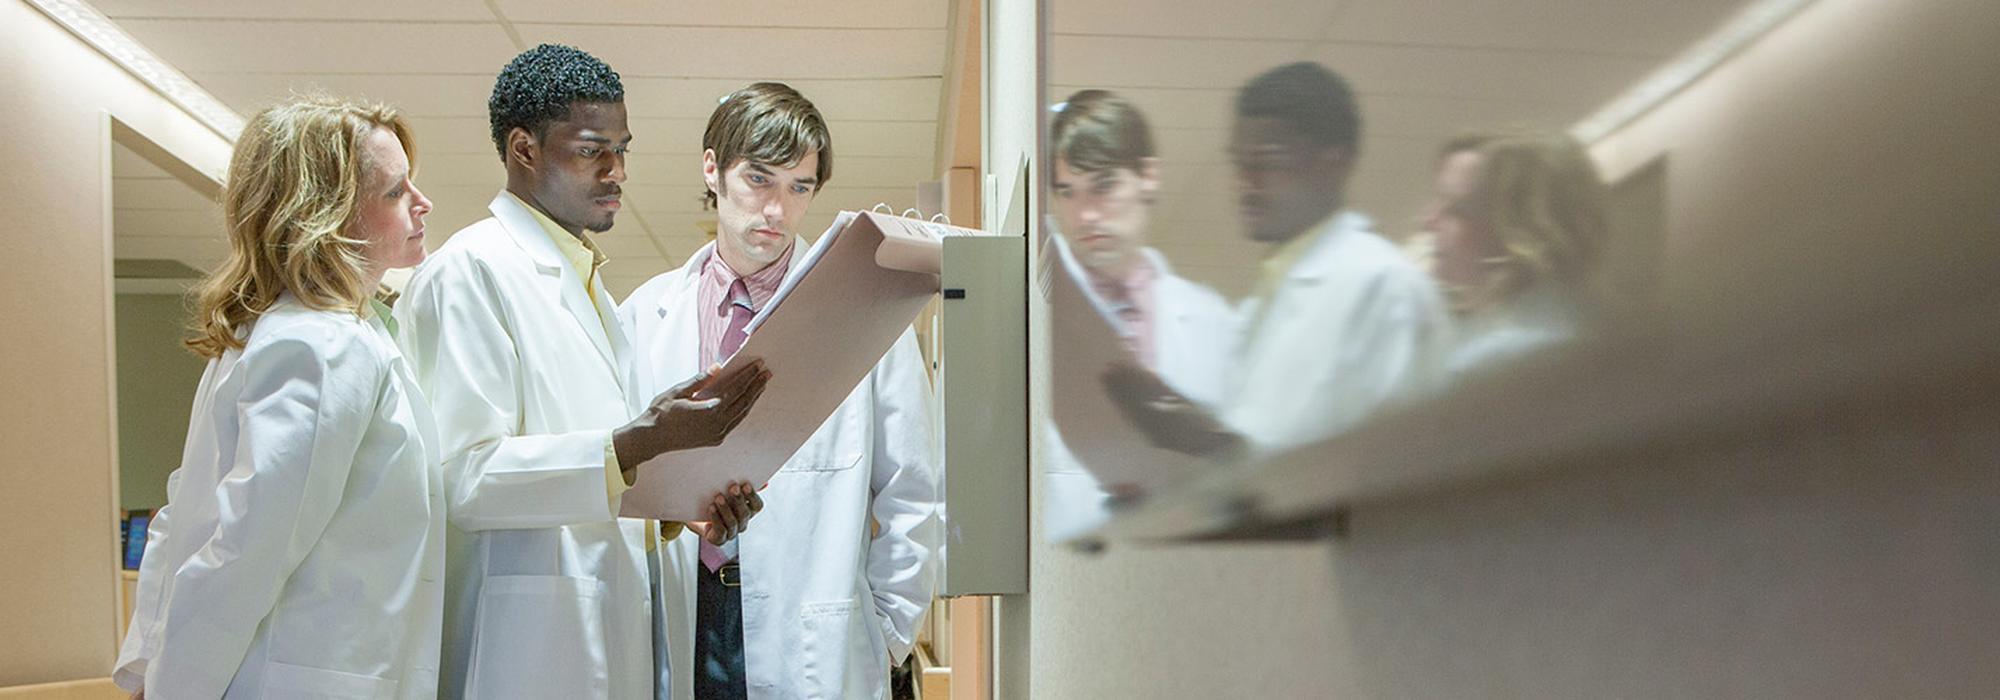 Three people in medical lab coats reviewing a patient chart